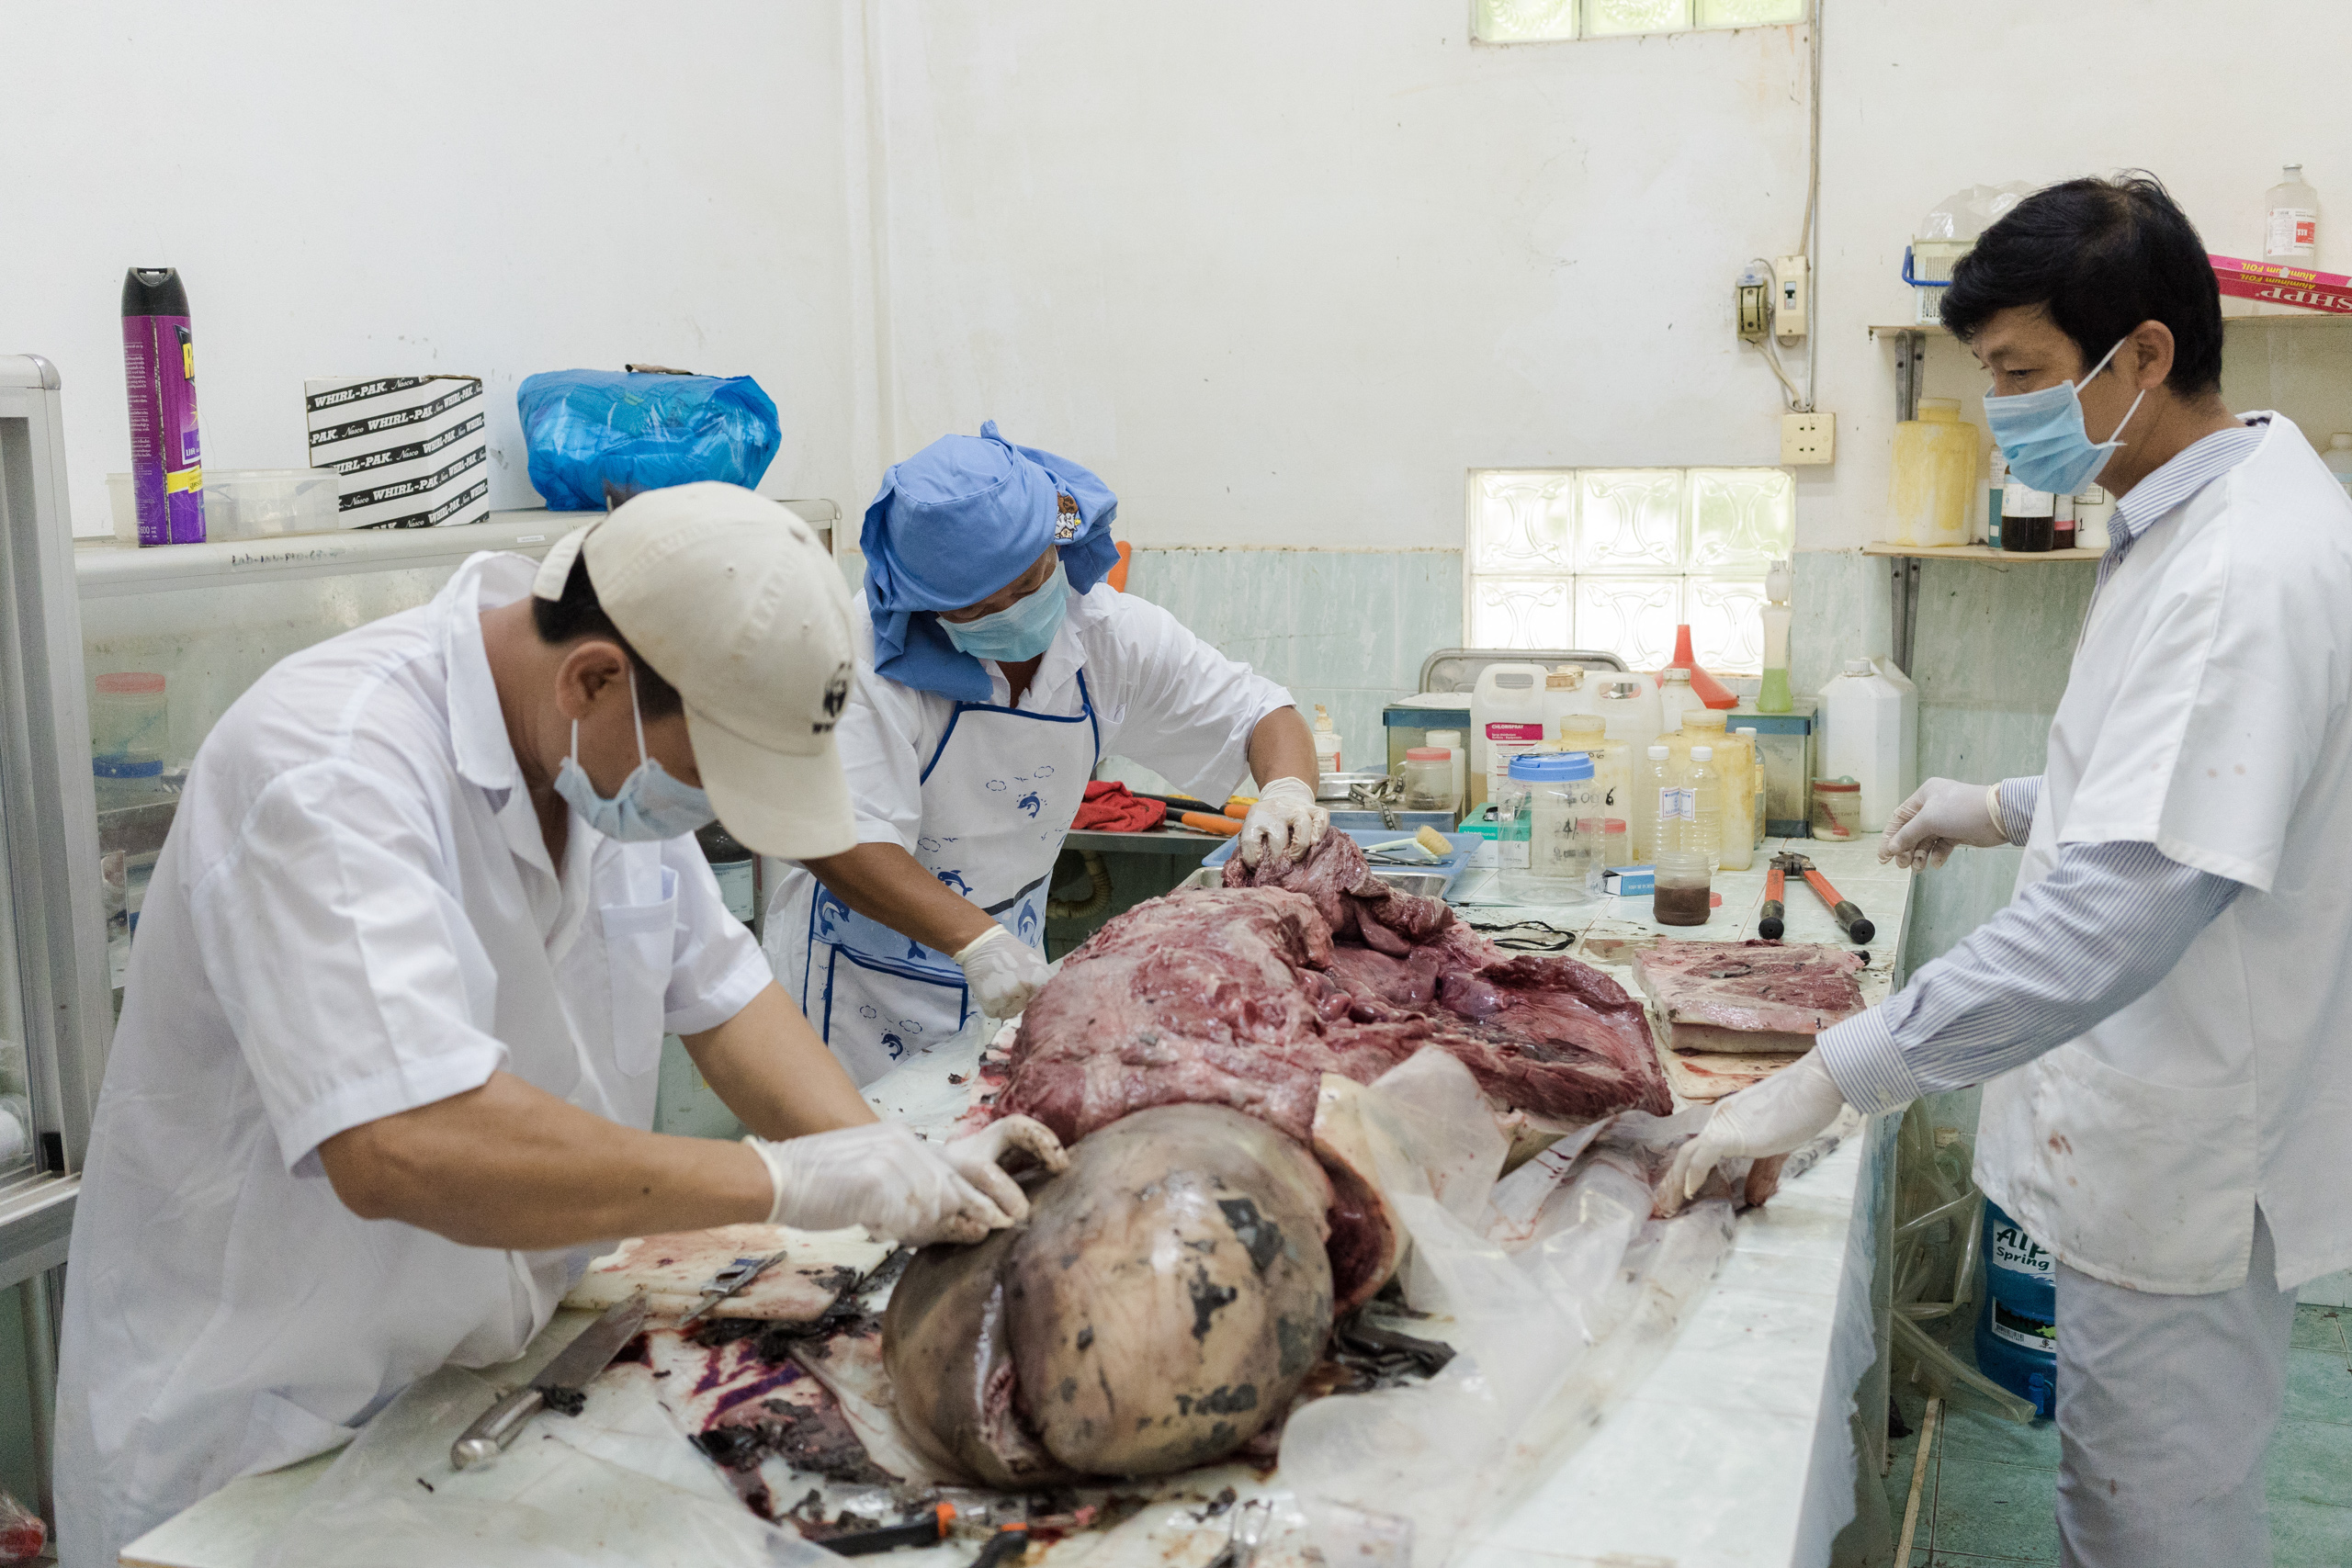 A team of WWF personal performs an autopsy on the carcass of an Irrawaddy dolphin found dead on June 29th 2018